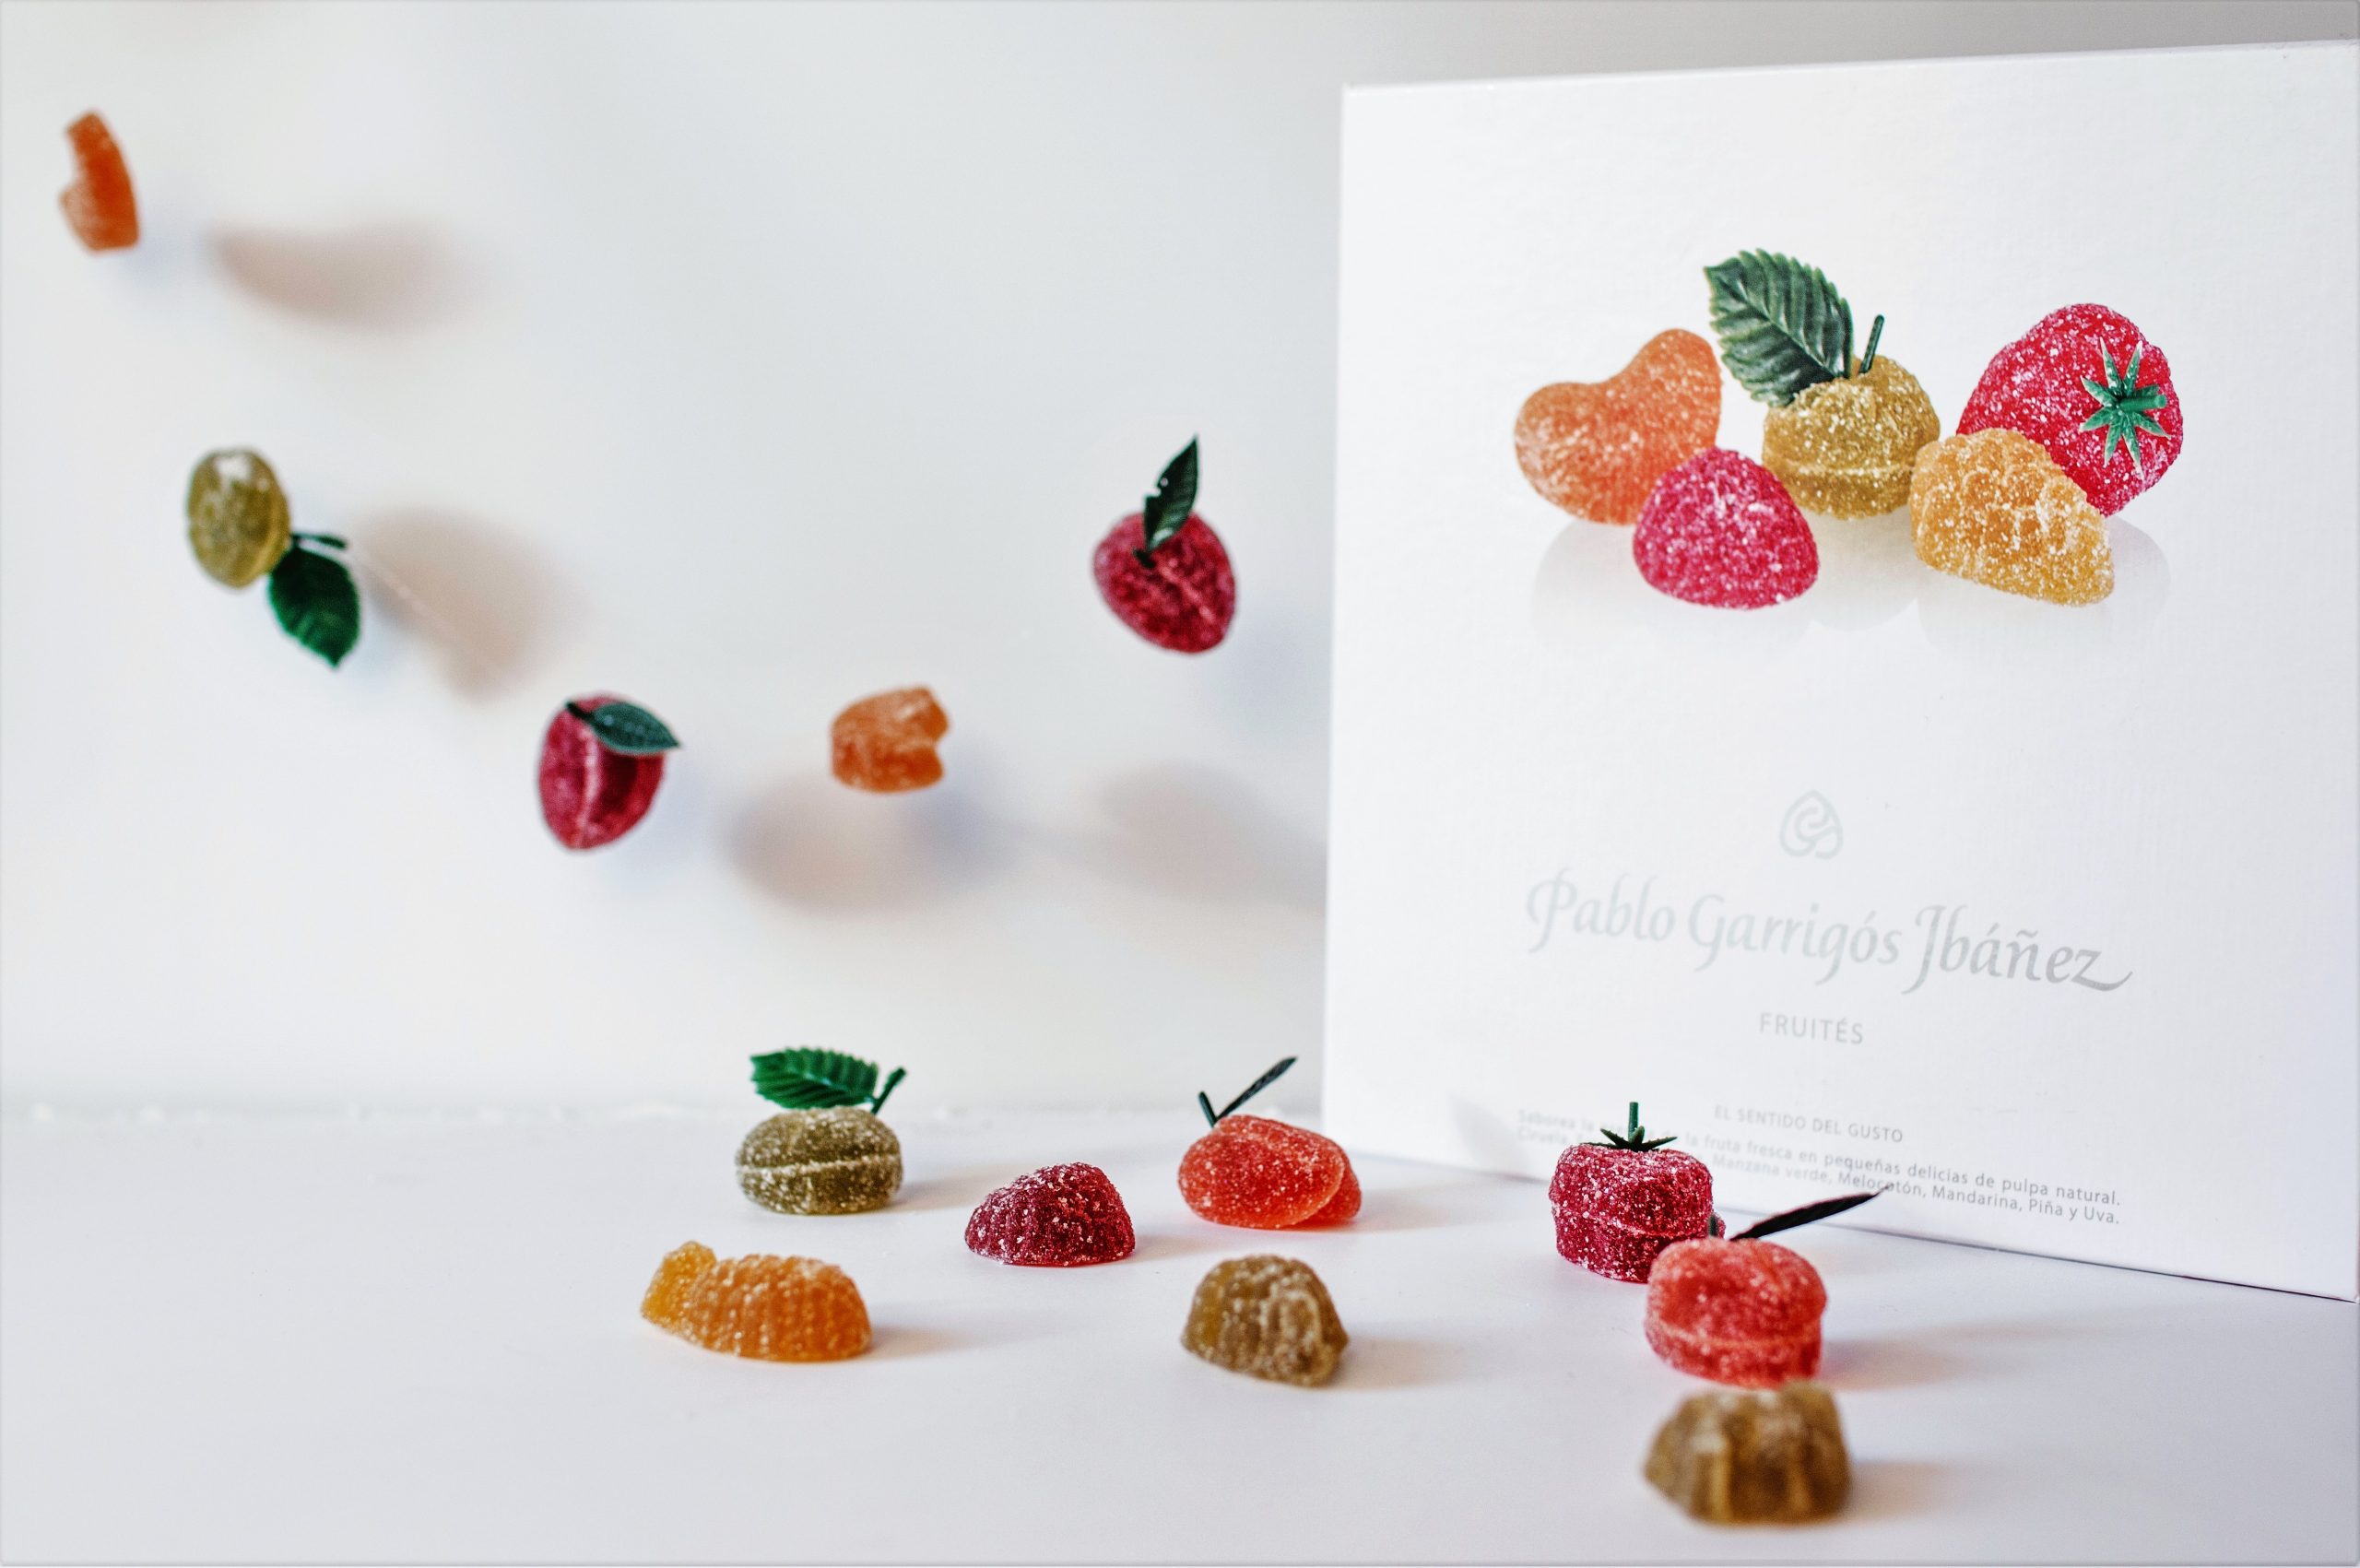 Fruités: candies made from natural fruit pulp